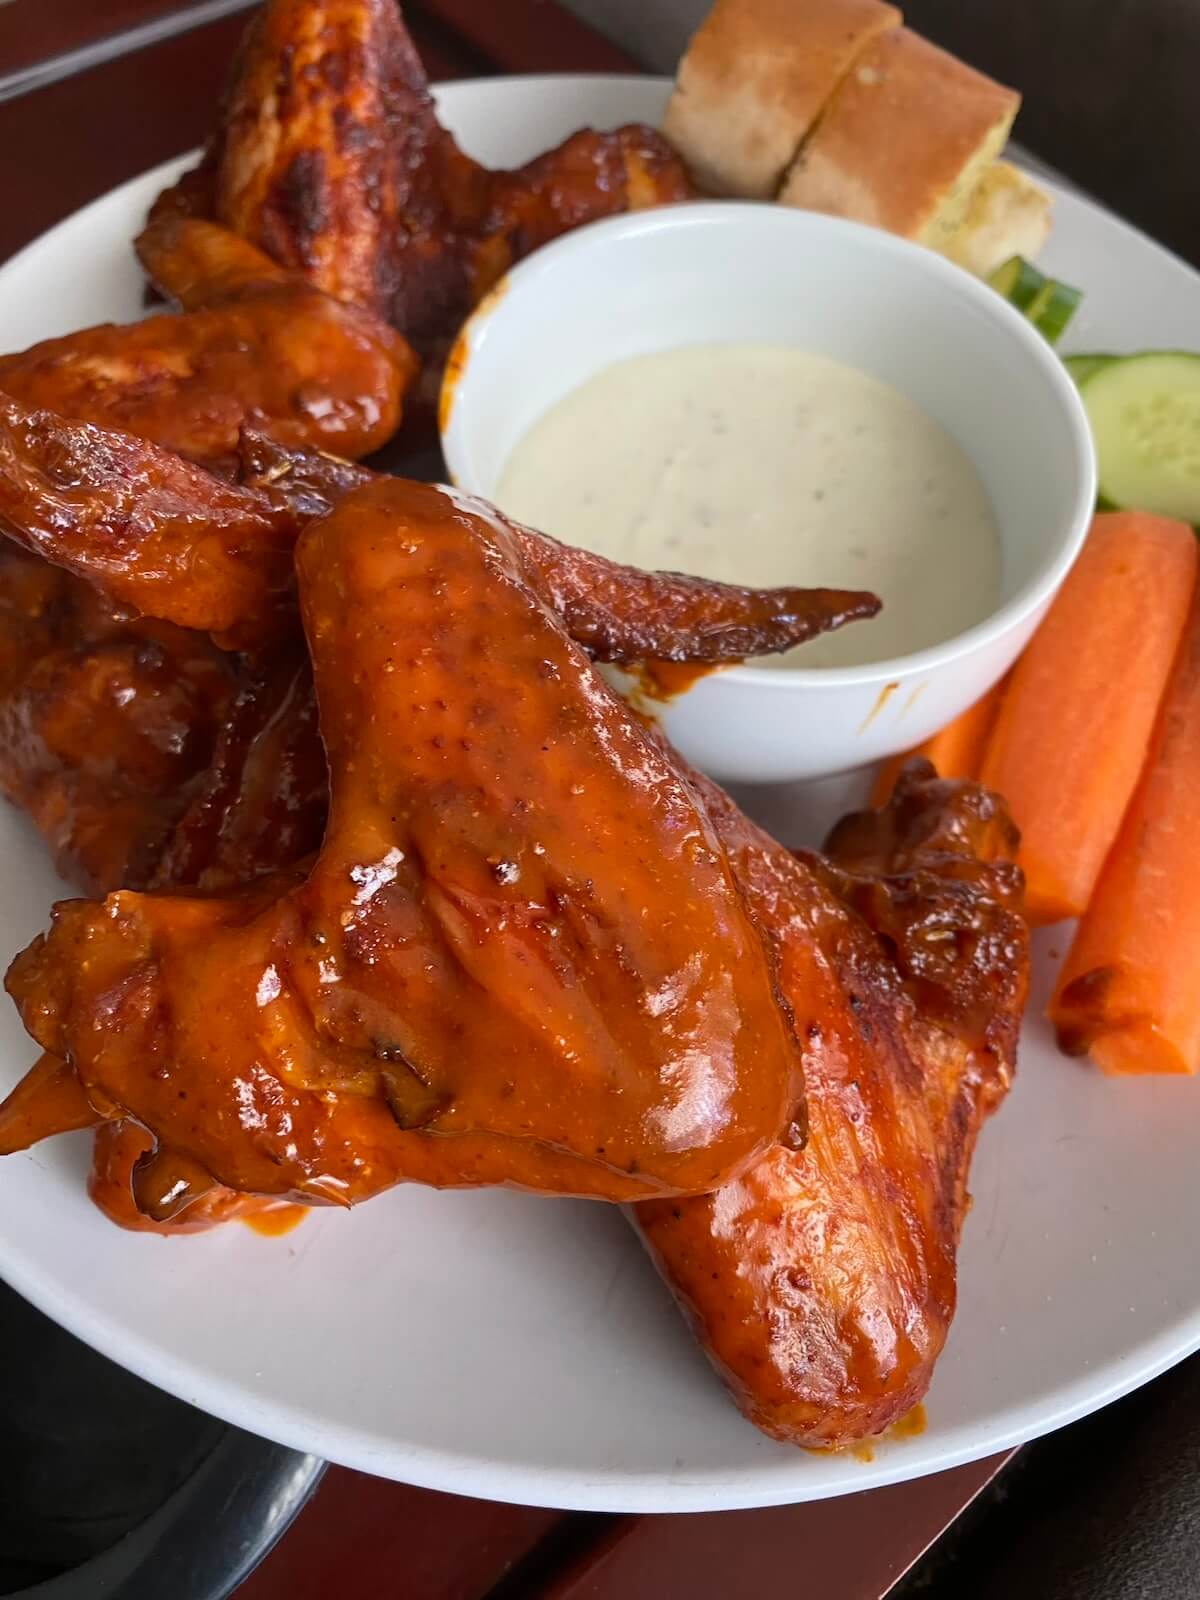 smoked buffalo wings with blue cheese sauce and carrot sticks on a plate.